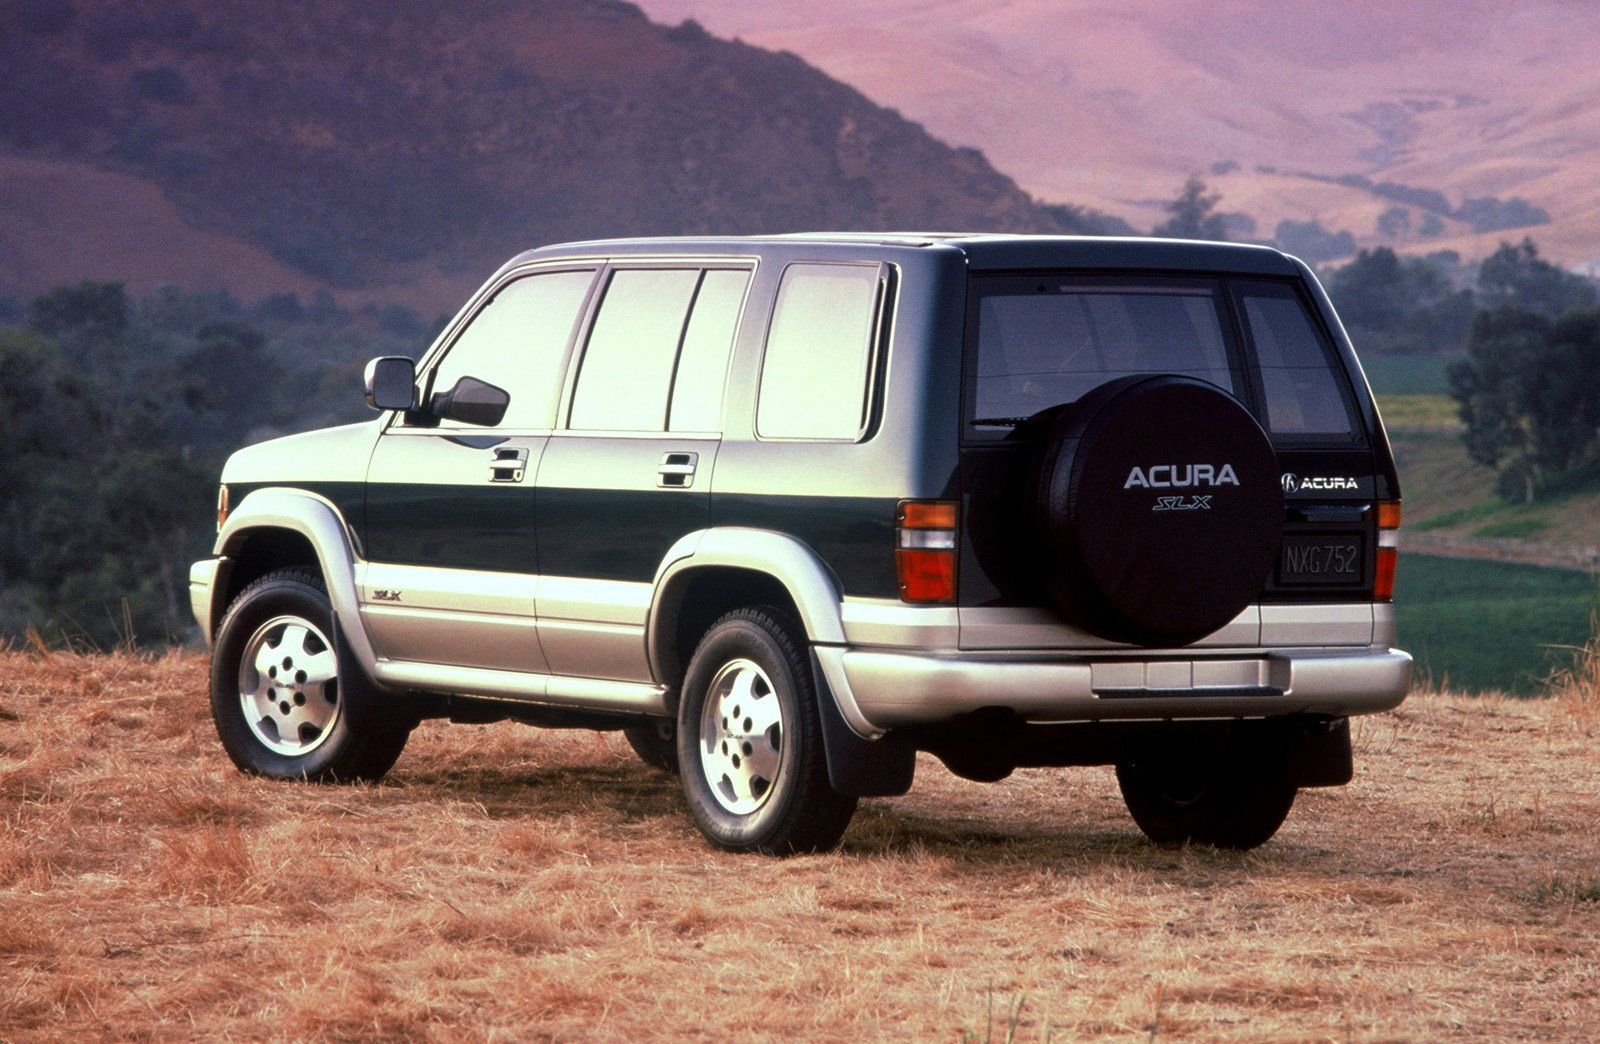 Https Www Hotcars Com Buying One Of These Suvs Is The Same As - 1996 acura slx 2 1600x0w 1 jpg